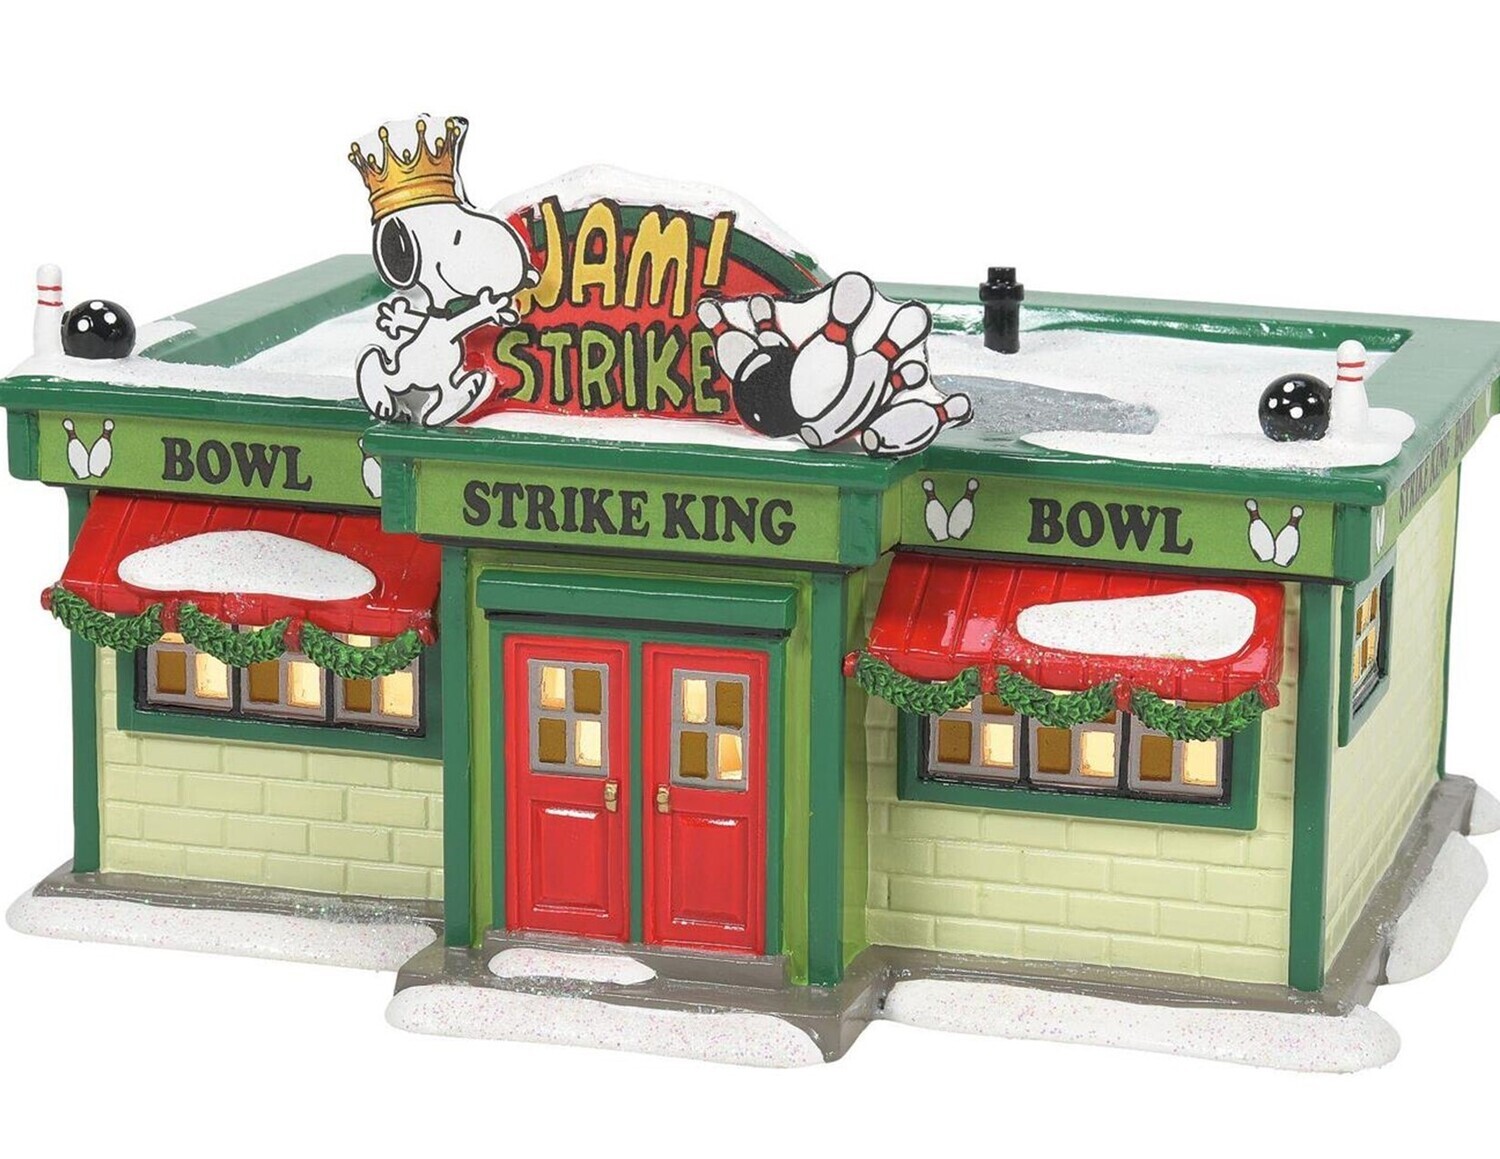 Peanuts Holiday Village Department 56 "Strike King" Bowling Alley Building (6009840)